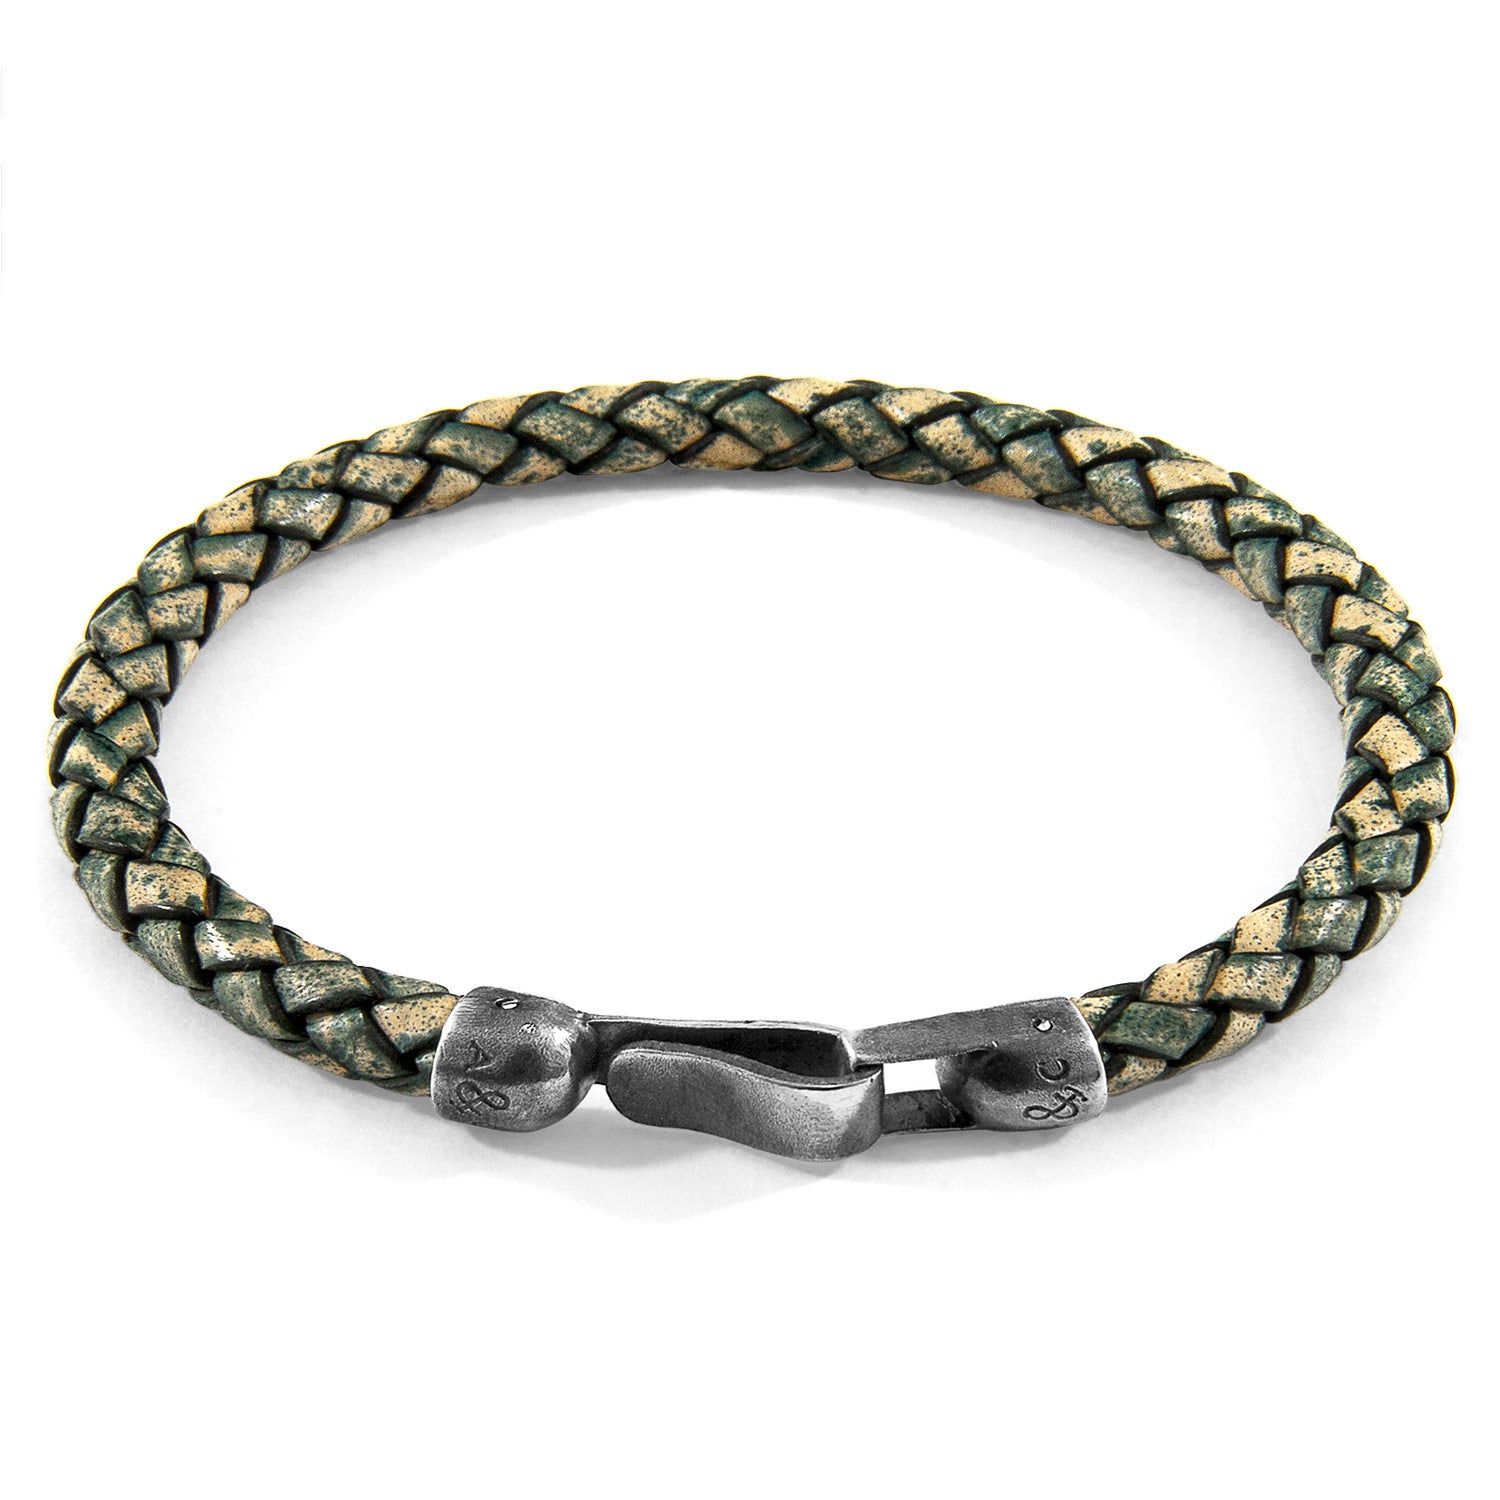 Petrol Green Skye Silver and Braided Leather Bracelet